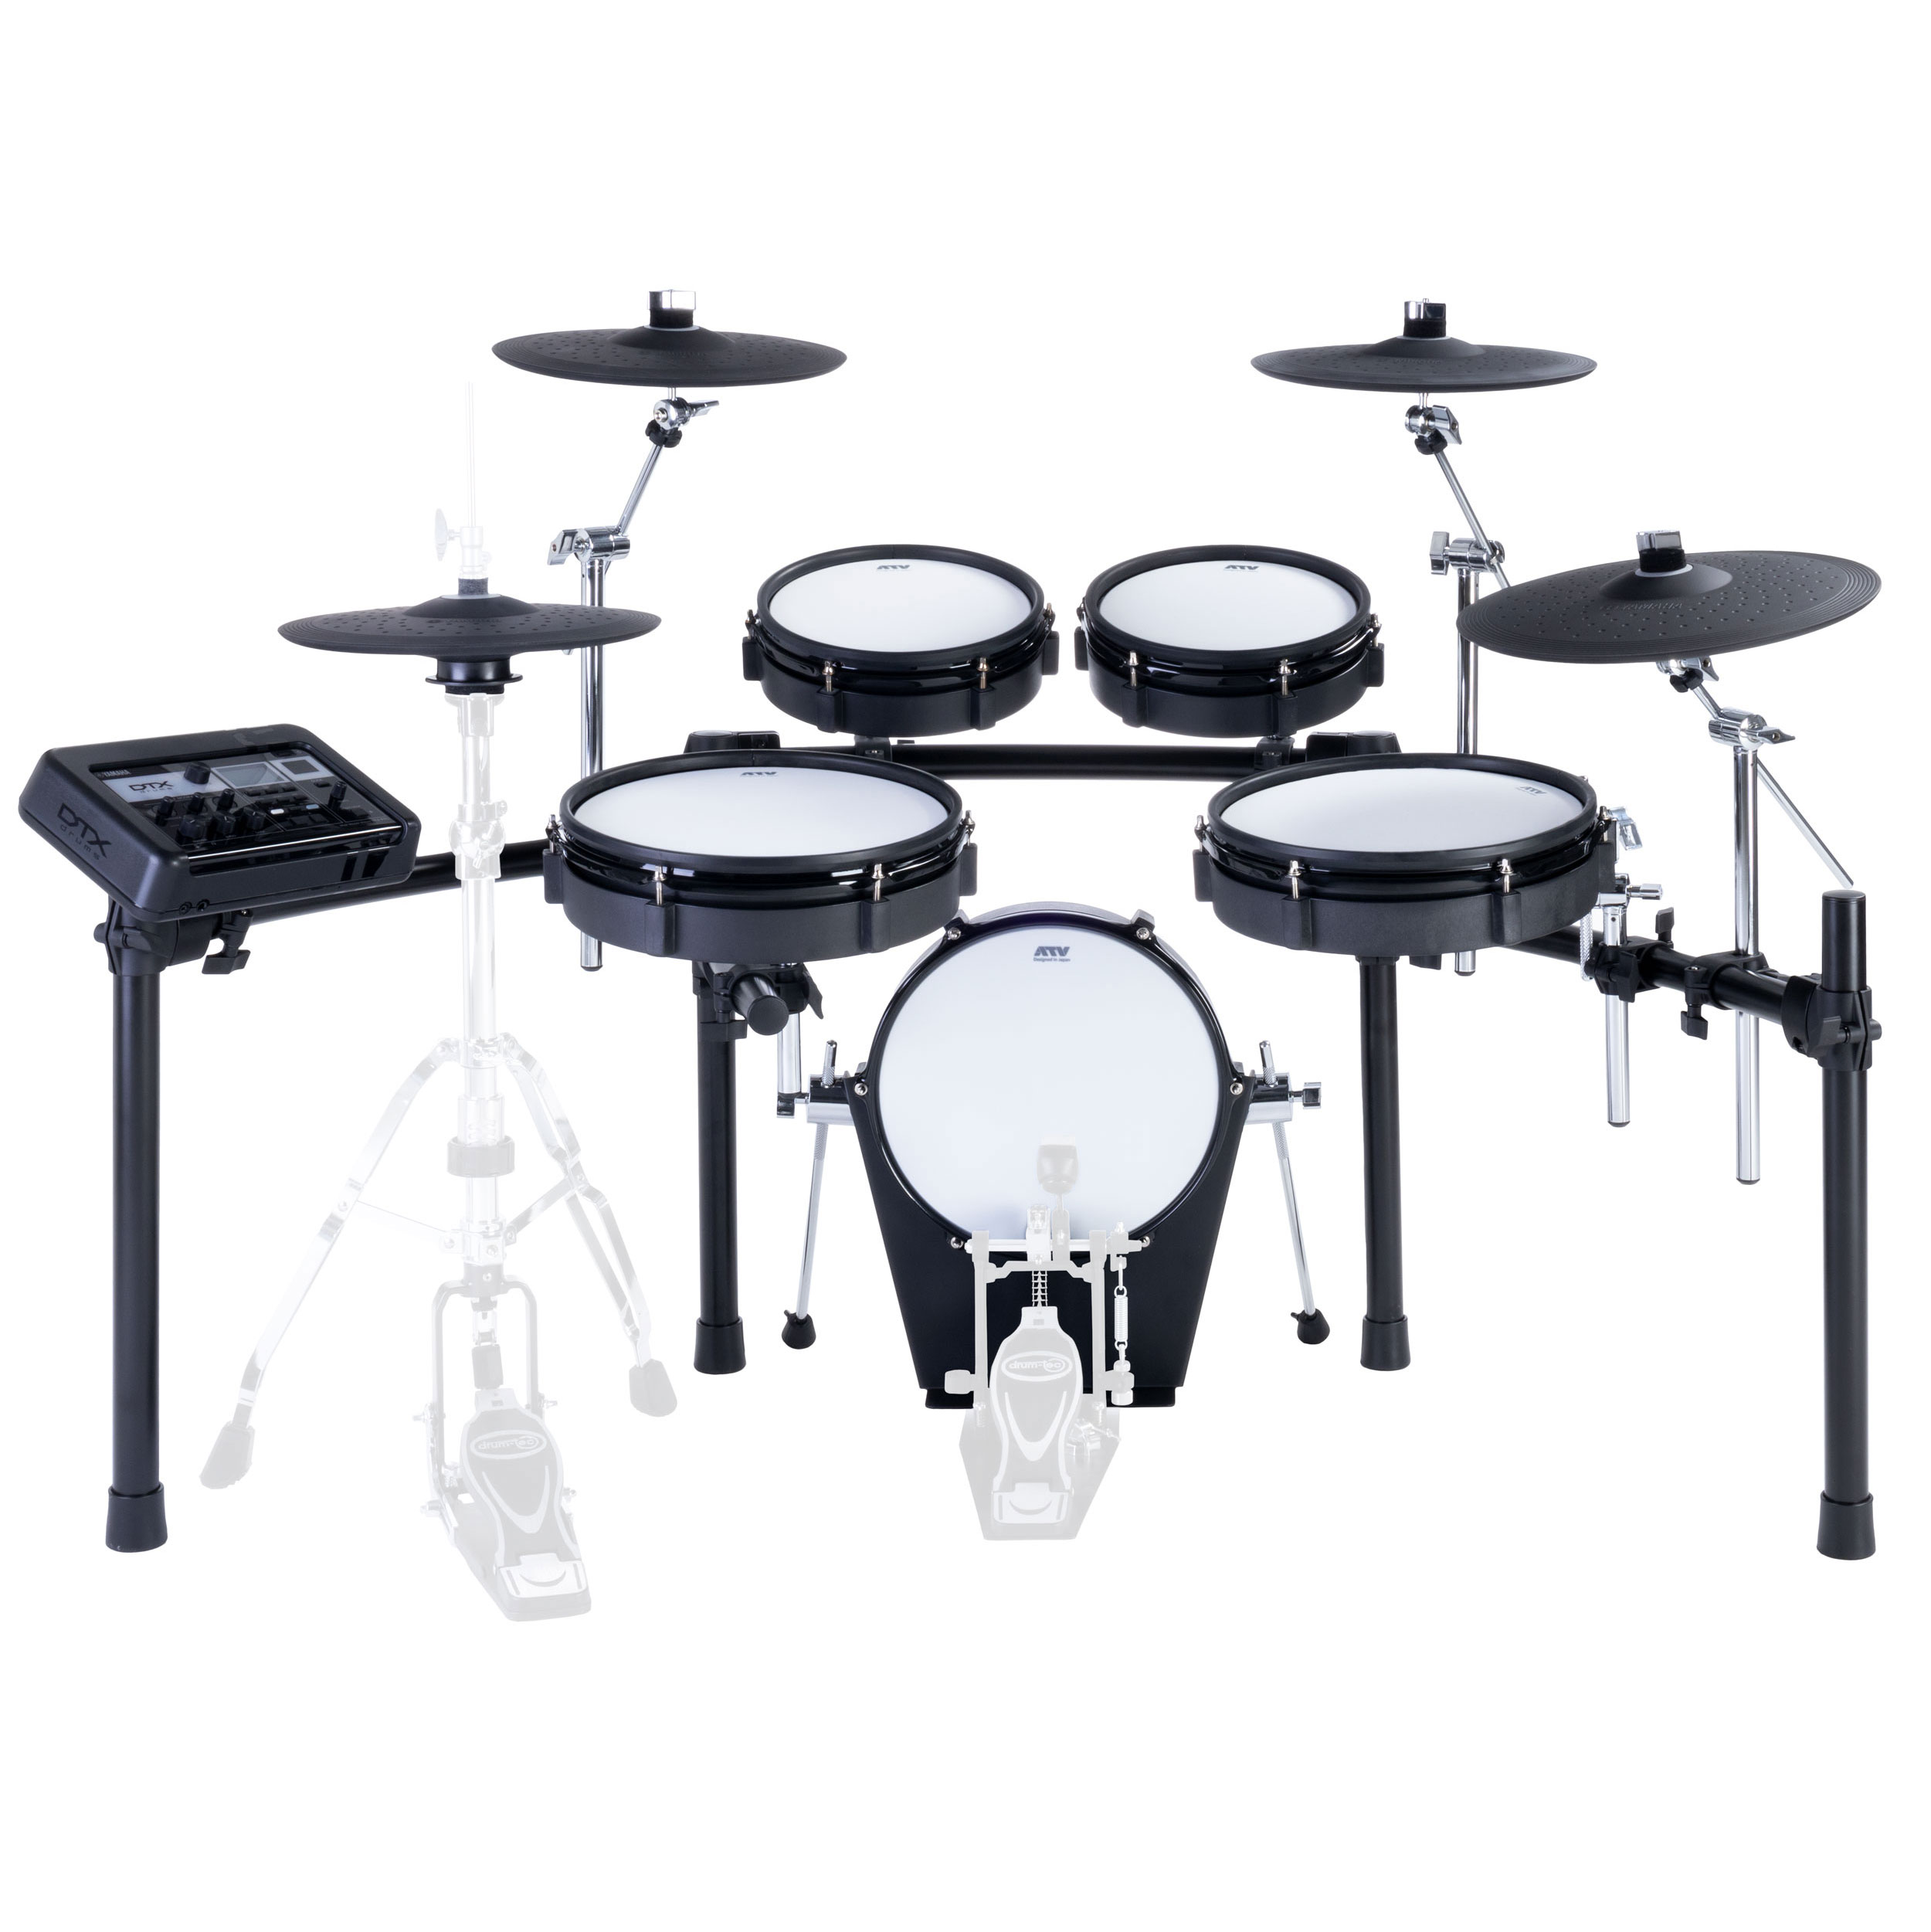 ATV EXS-Full Sized E-Drum Set with Yamaha DTX-Pro incl. Live Sound Edition